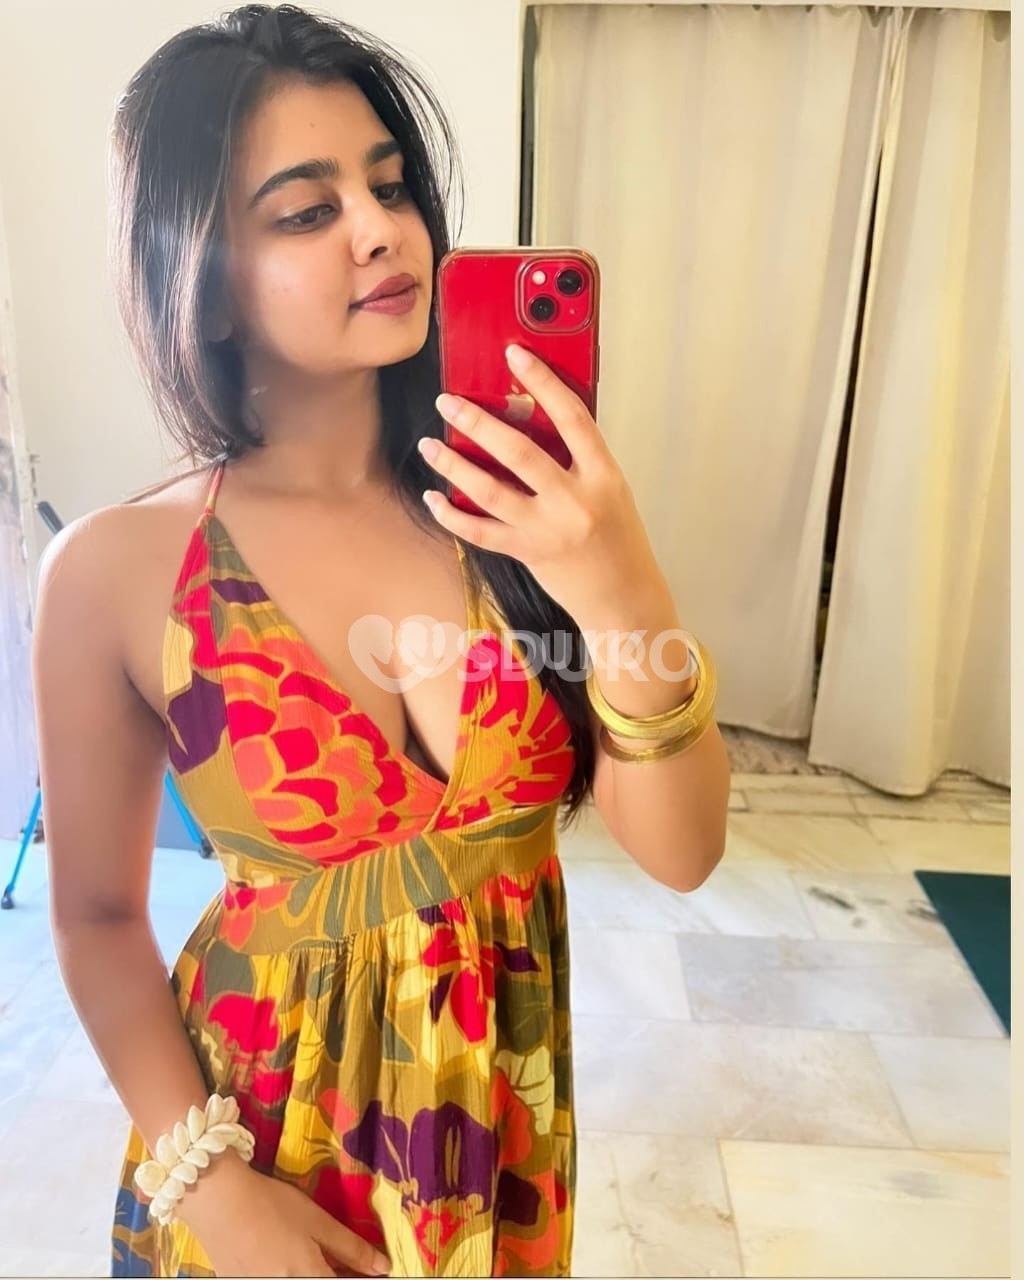 Bhiwandi 💯  Full satisfied independent coll girls 24 hours available